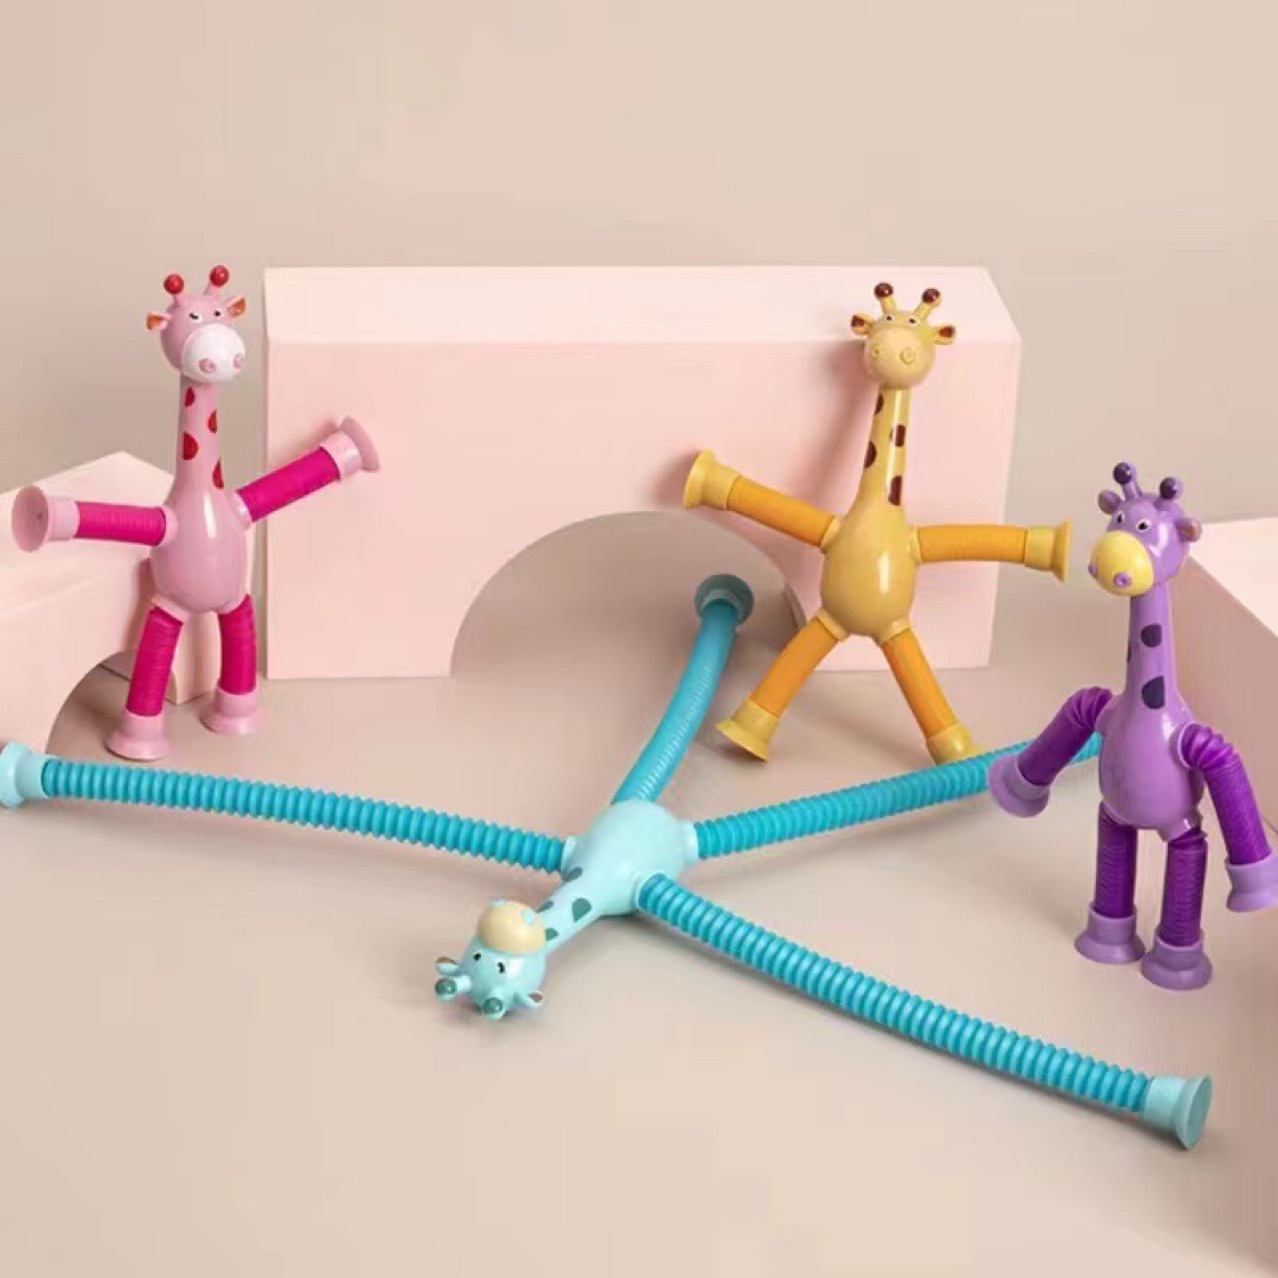 Telescopic Giraffe Toy Novelty Puzzle Pressure Relief Toy Cartoon Suction Cup Stretch Luminous Giraffe Variety of Shapes